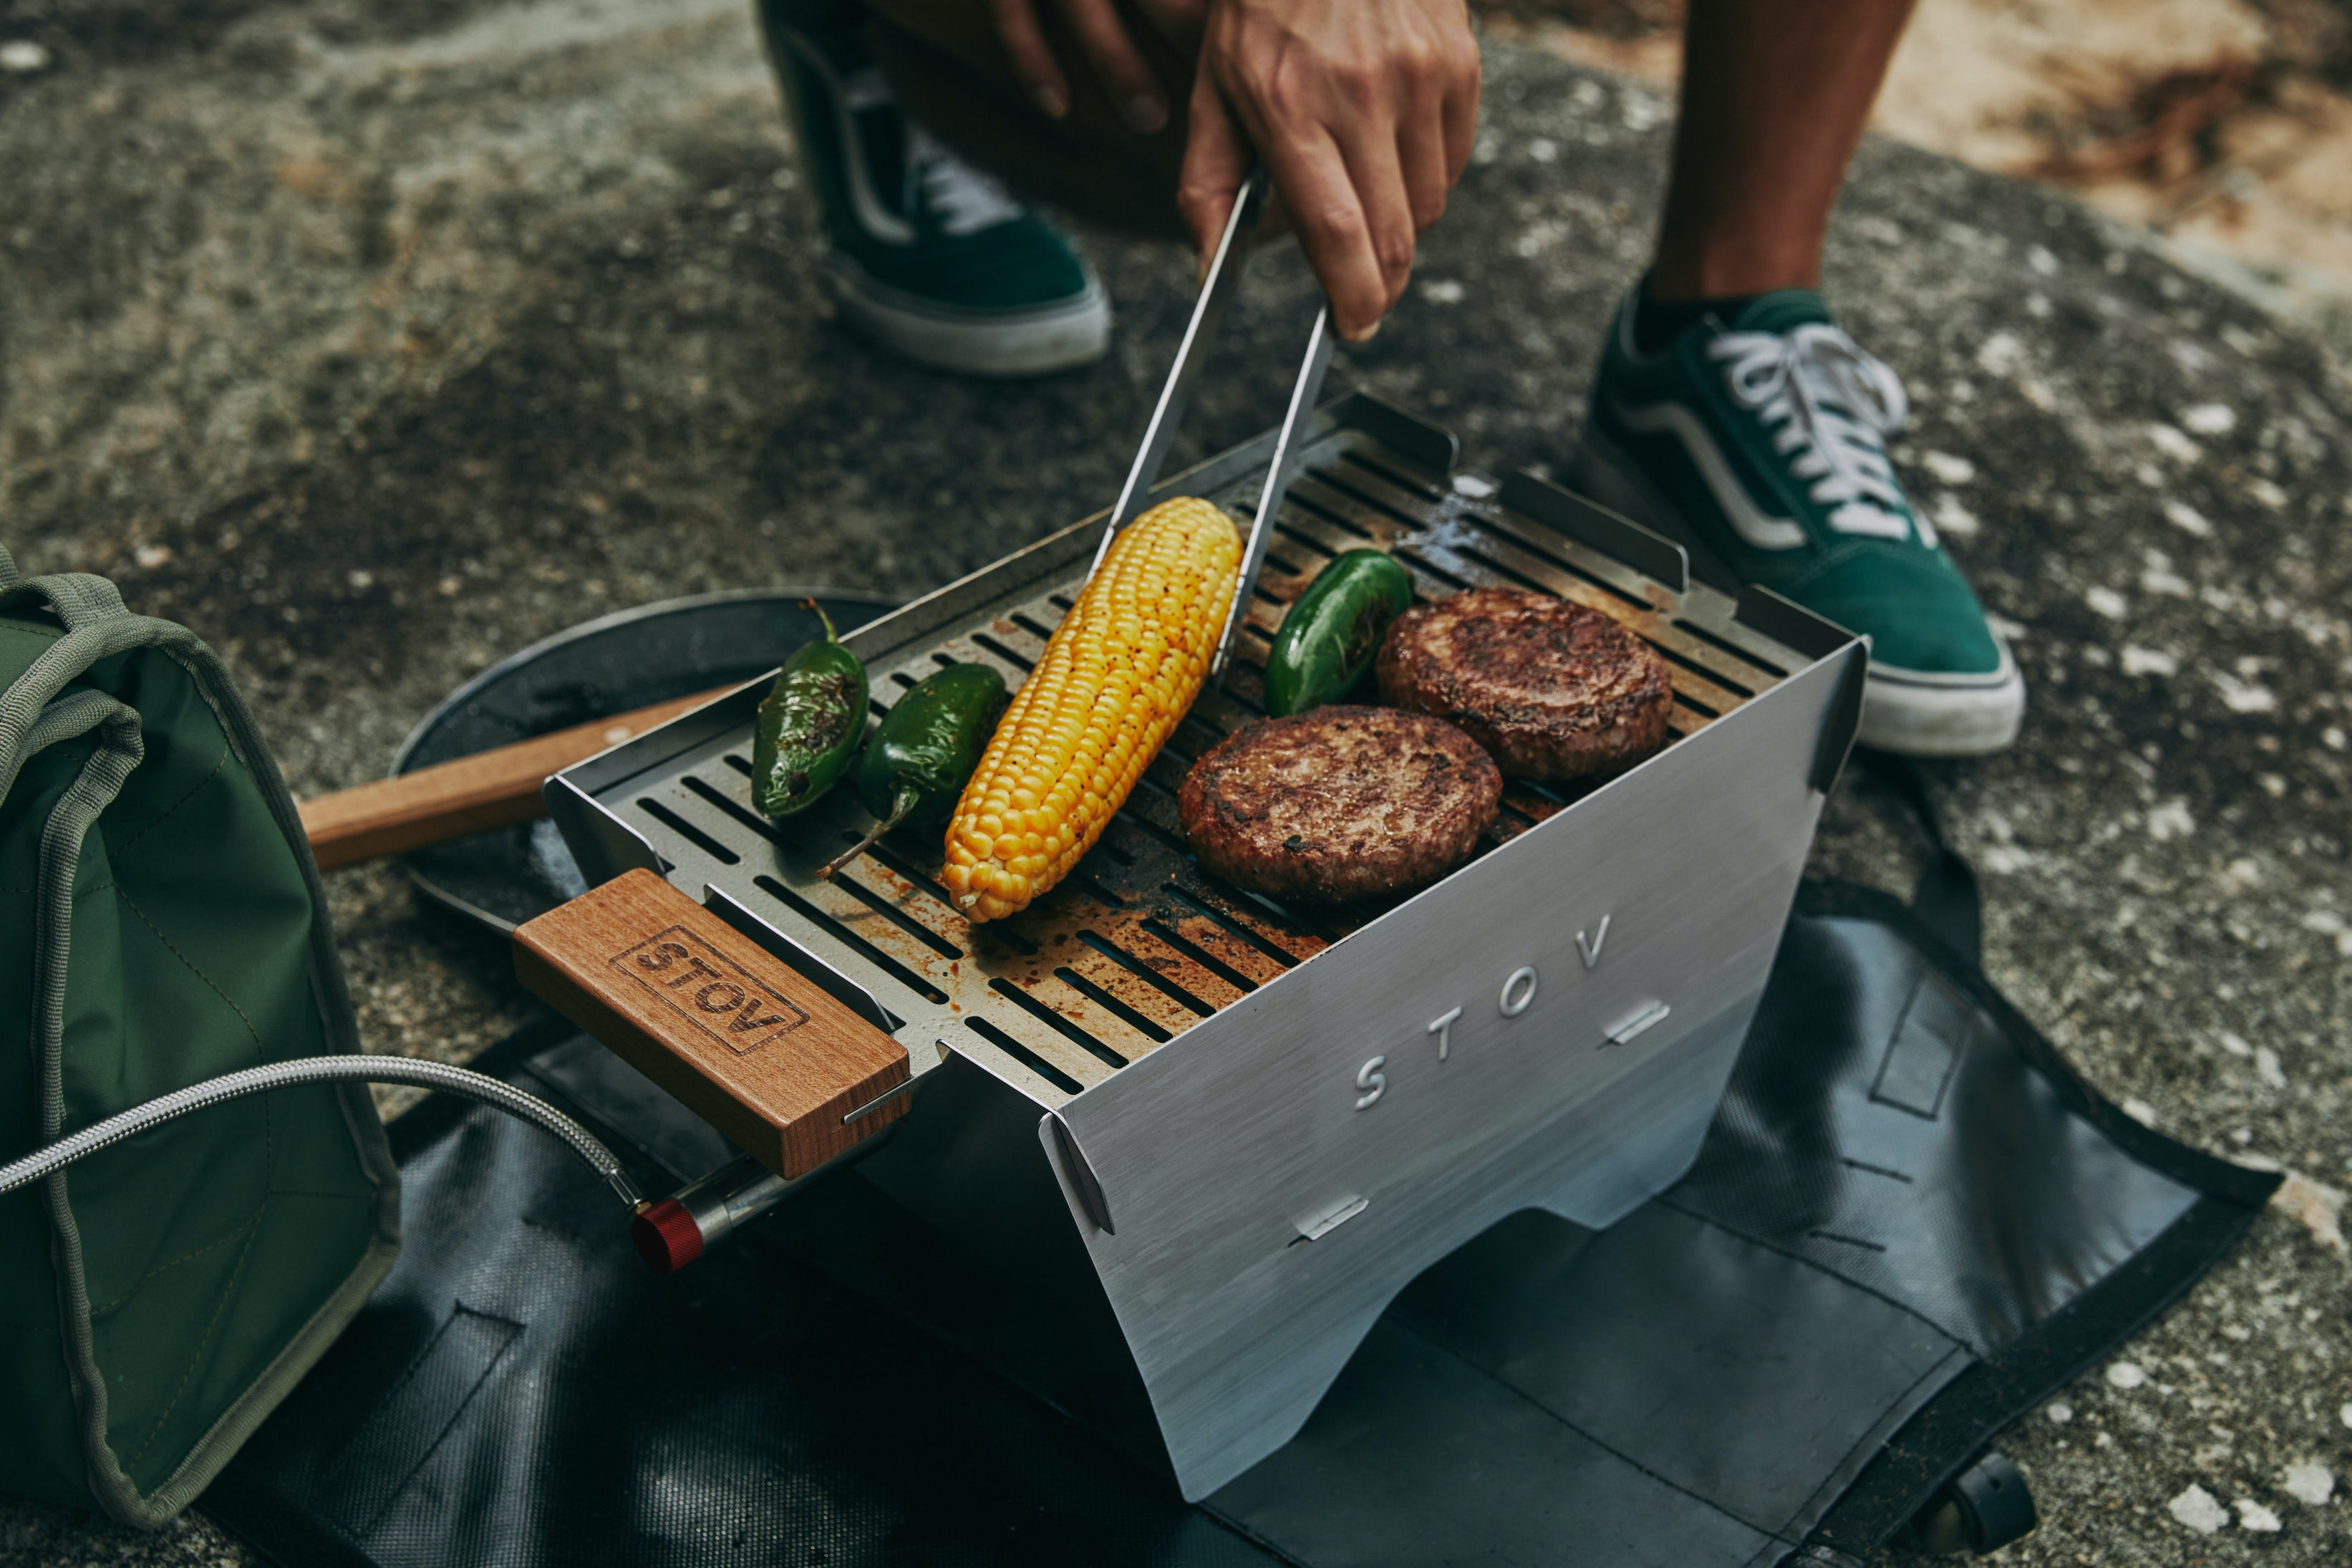 Best portable bbq for camping - the compact STOV gas BBQ set up cooking really good food